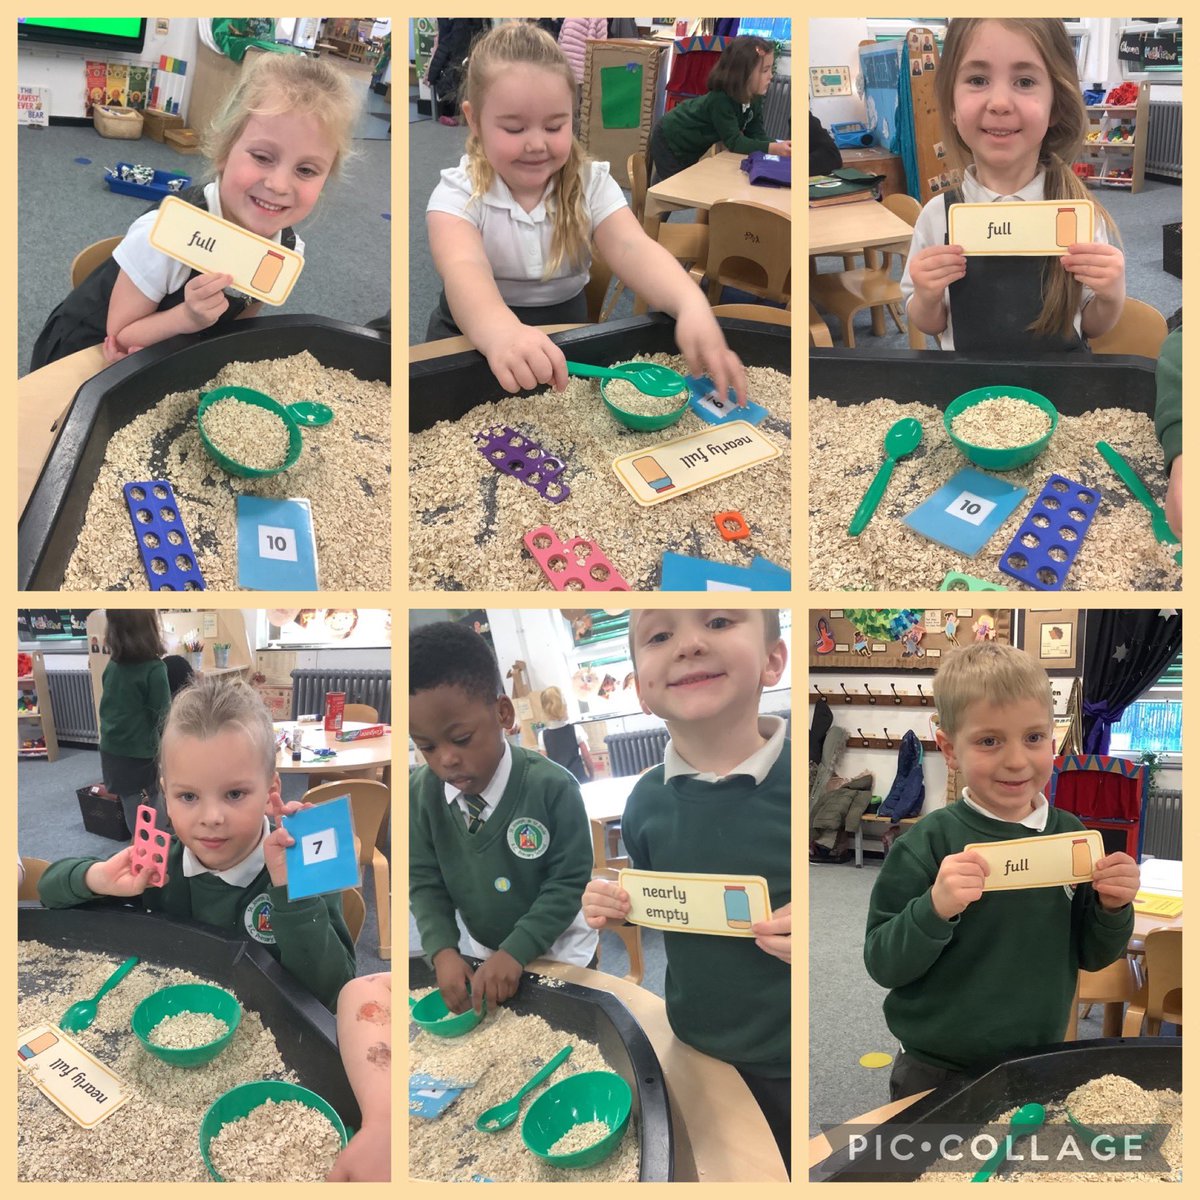 Reception @StJosephStBede have been busy problem solving using porridge oats linking to ‘The Three Bears’. We carefully counted scoops, found one more and used language like full and empty when describing the bowls. We had so much fun whilst learning! #SJSBMaths #ProblemSolving